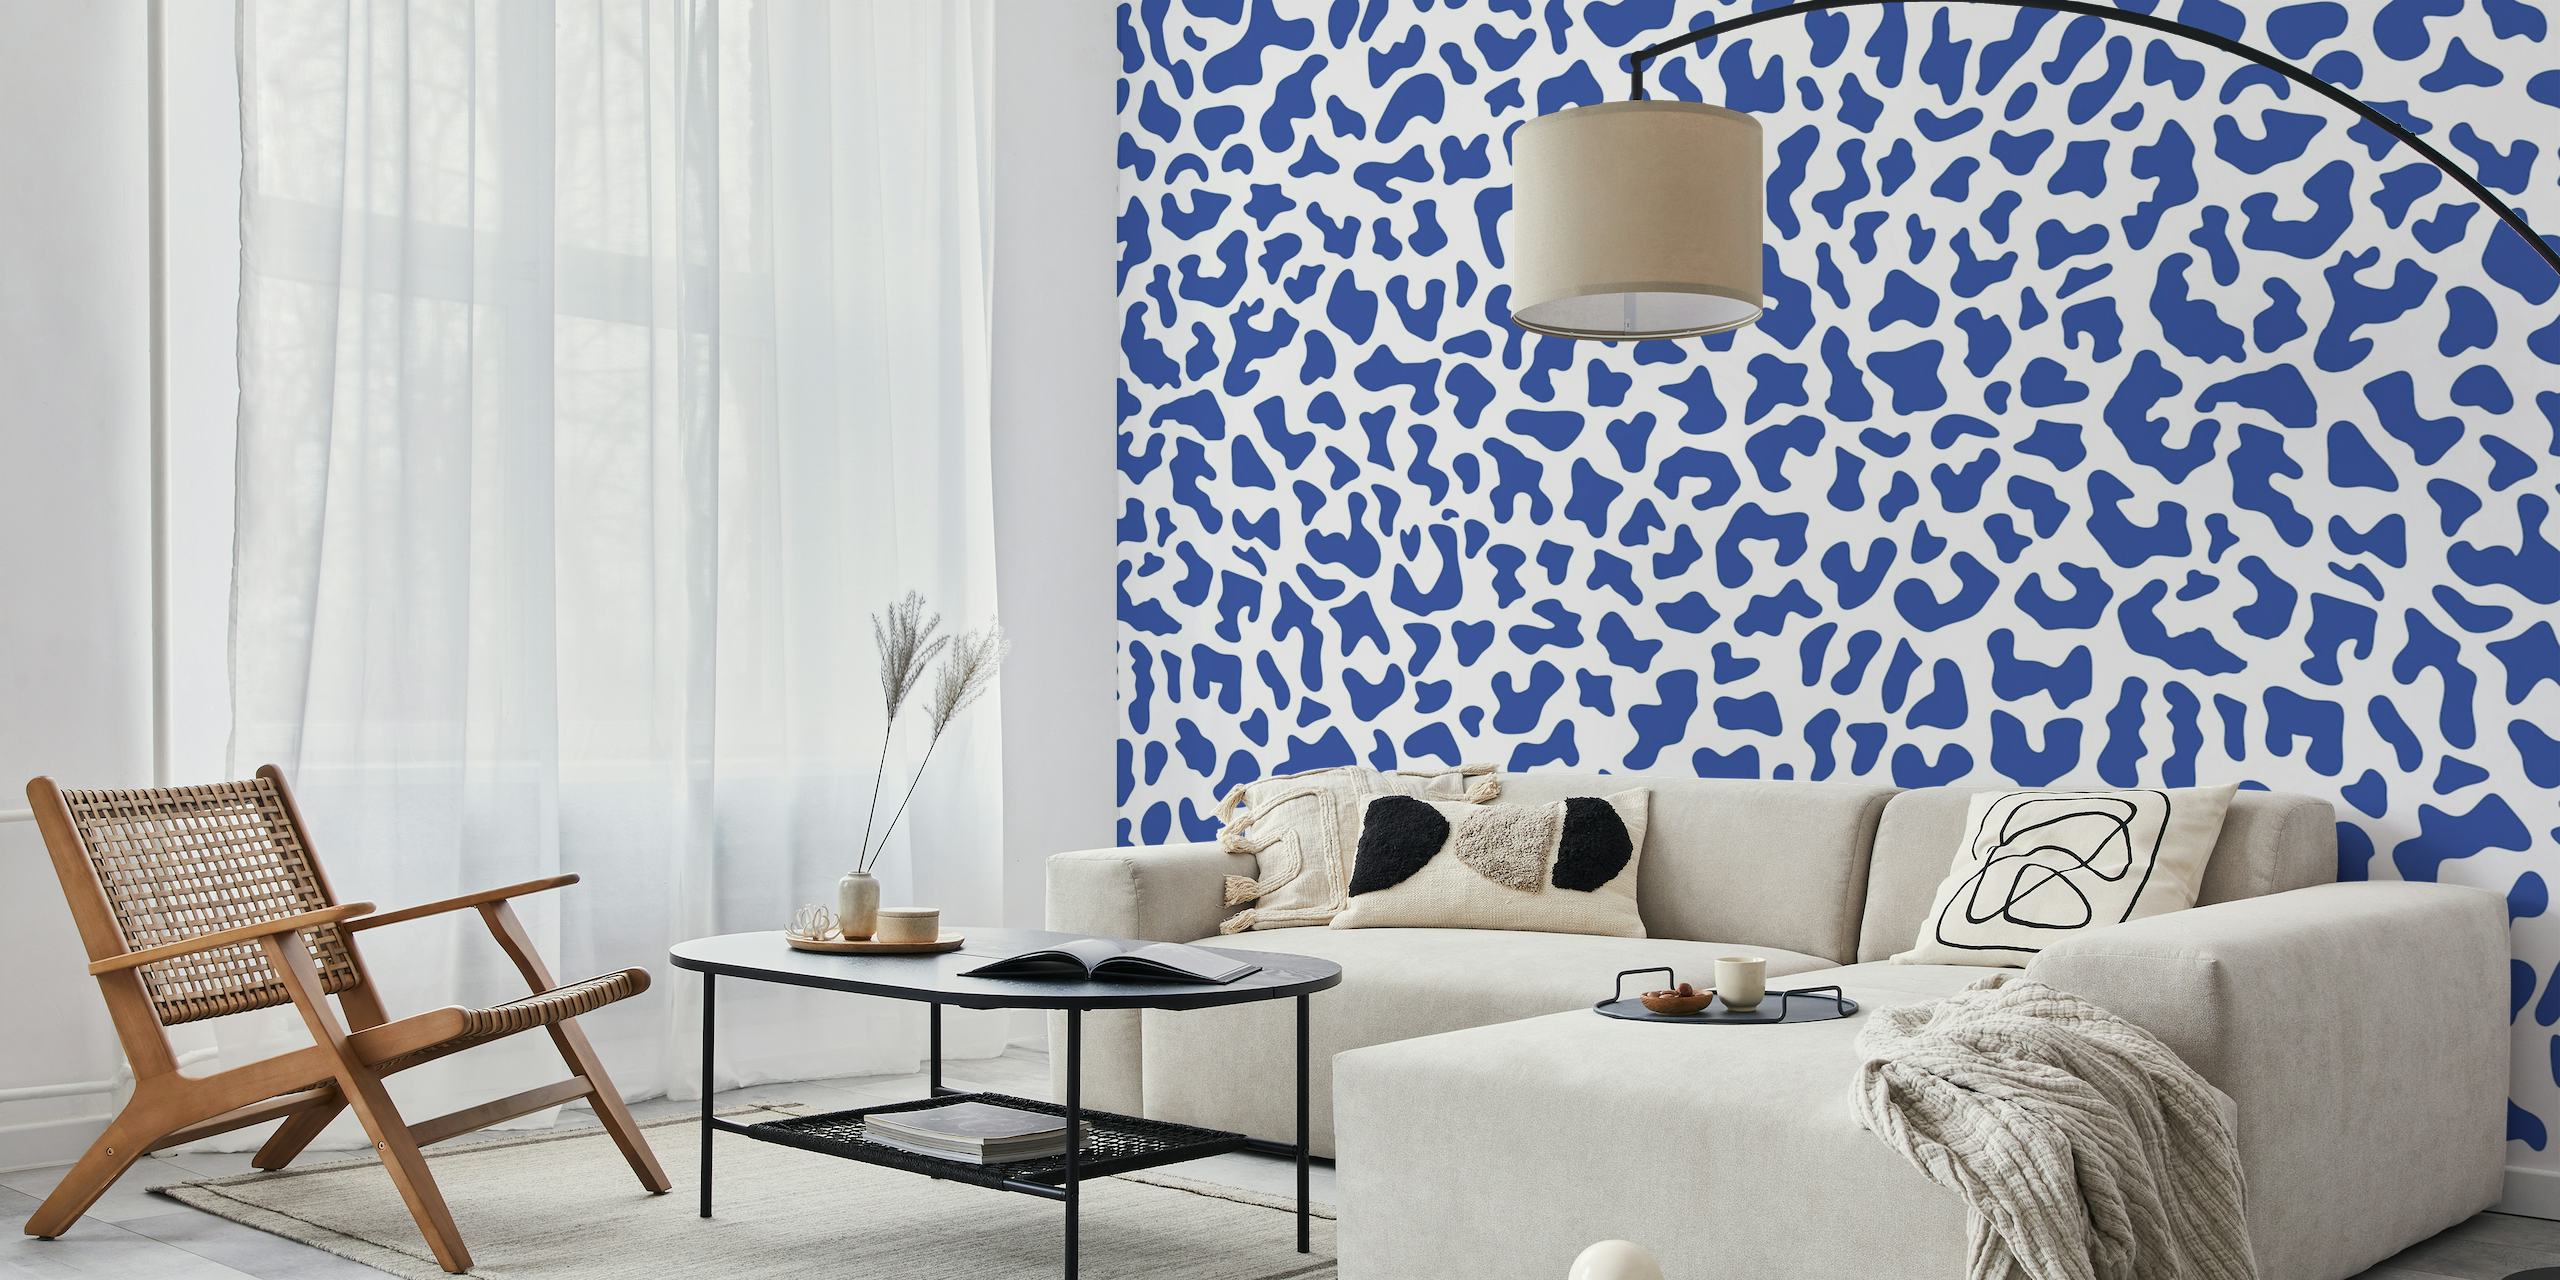 Blue and white leopard print wall mural design